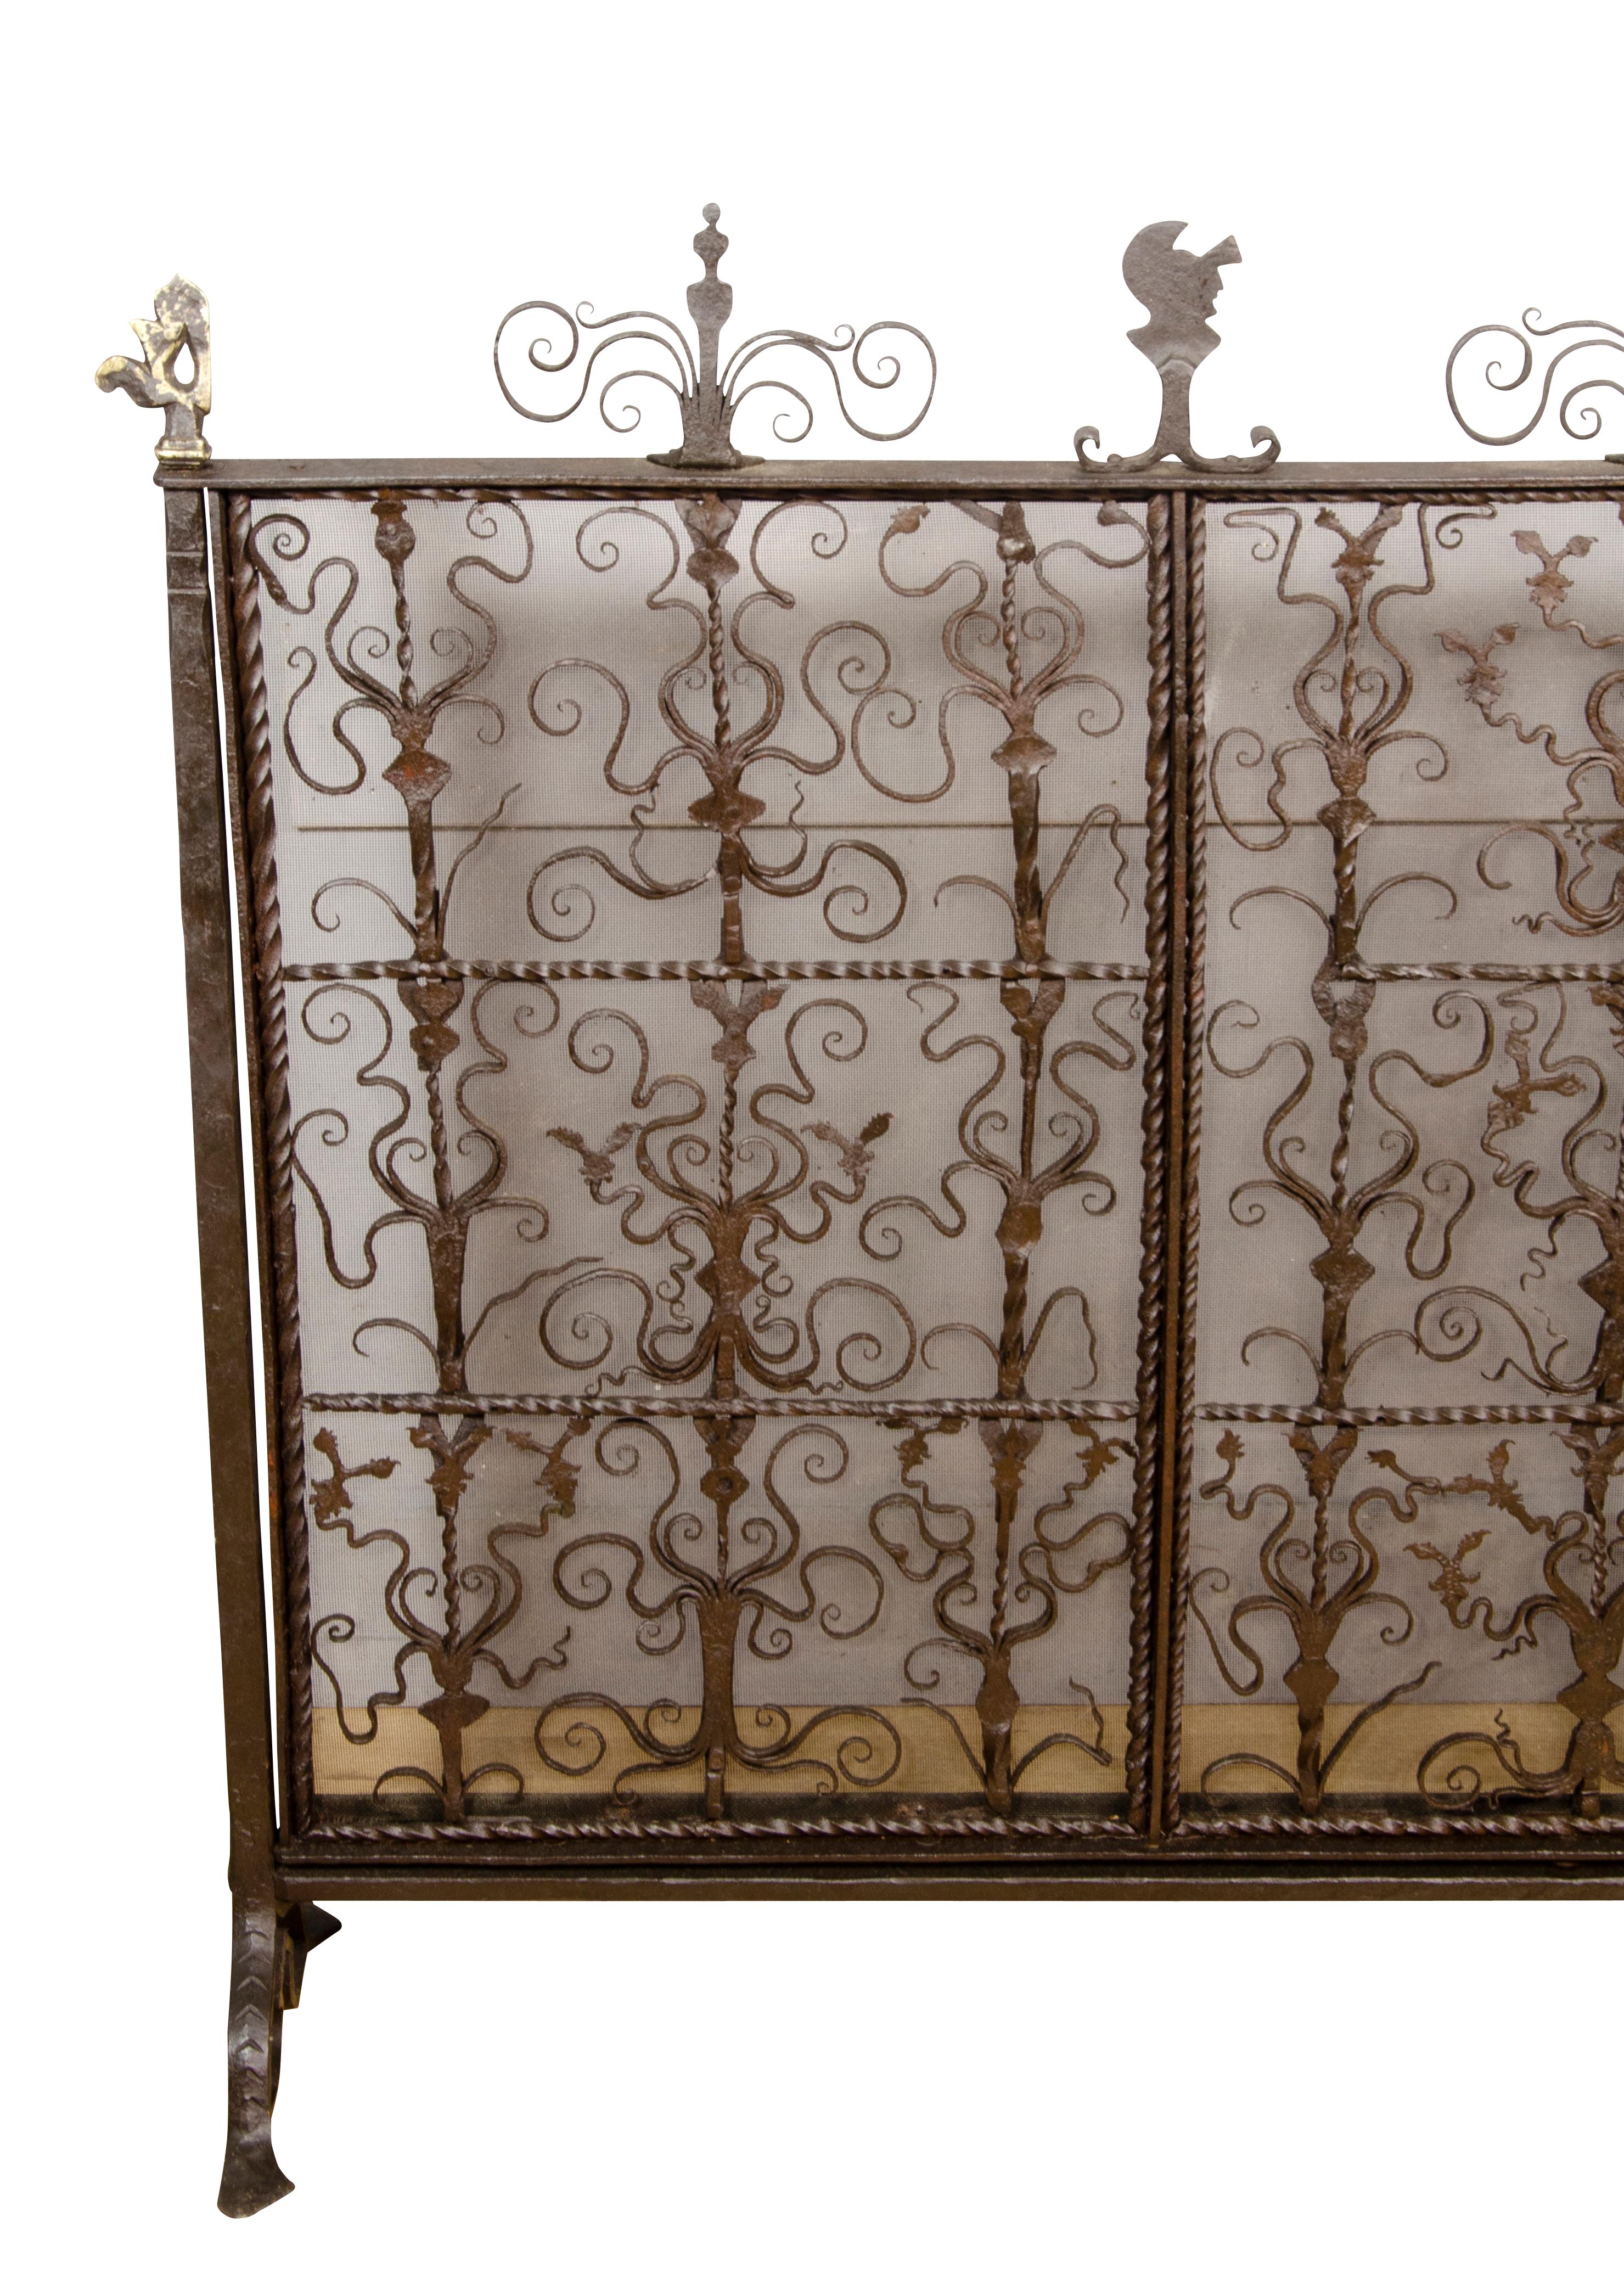 Renaissance Style Wrought Iron Fire Screen In Good Condition For Sale In Essex, MA